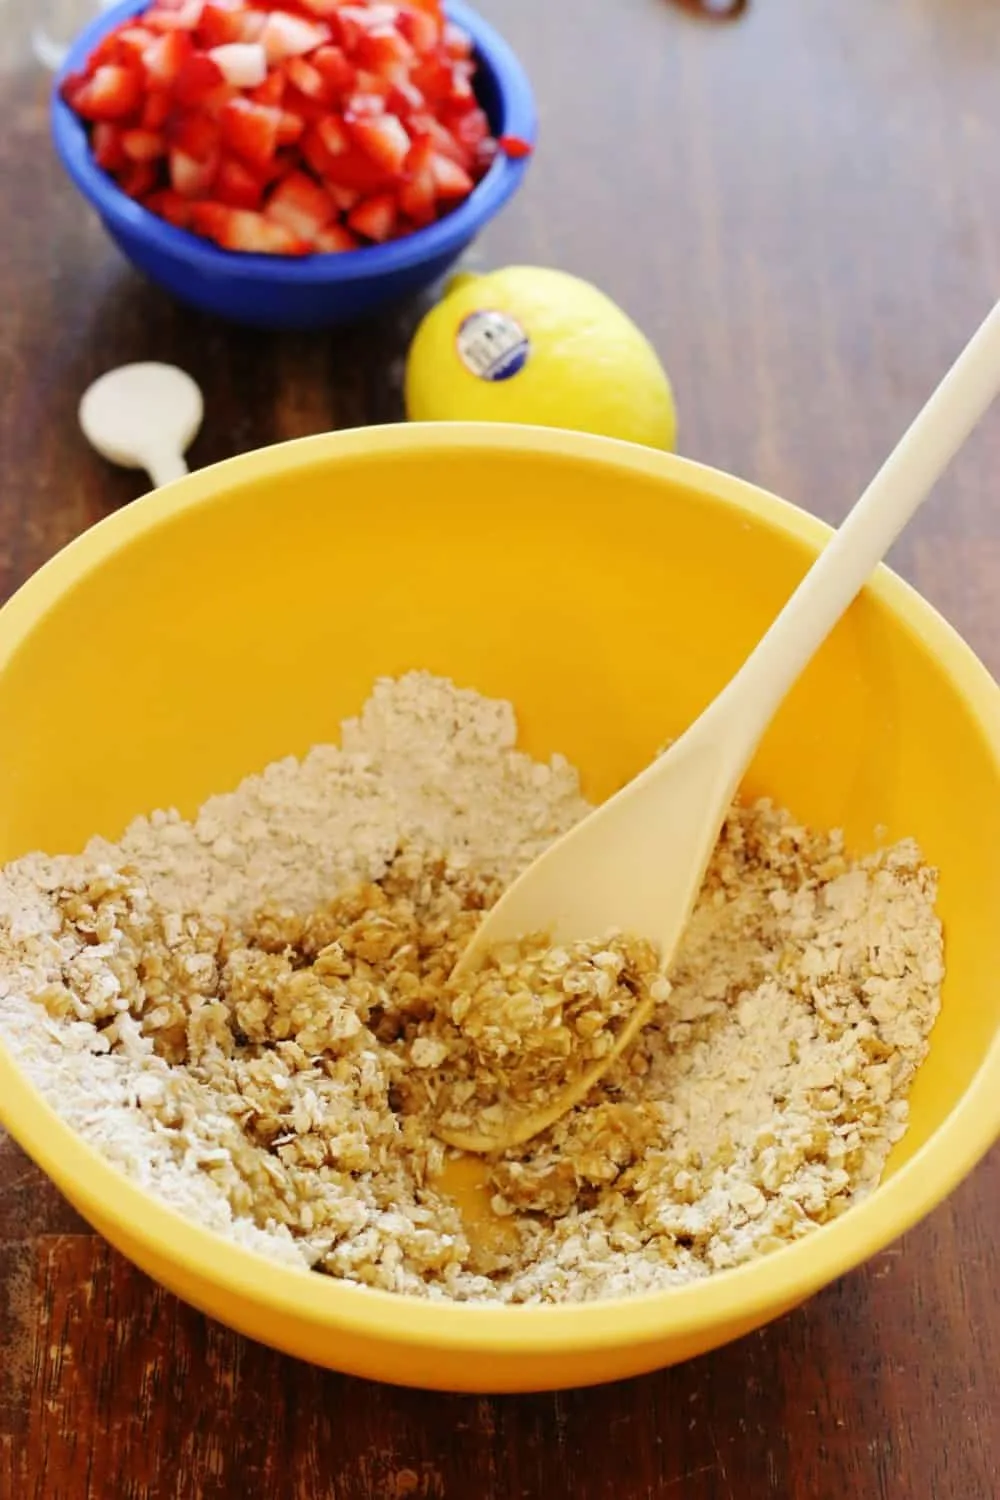 Mixing butter together with oats in a yellow bowl